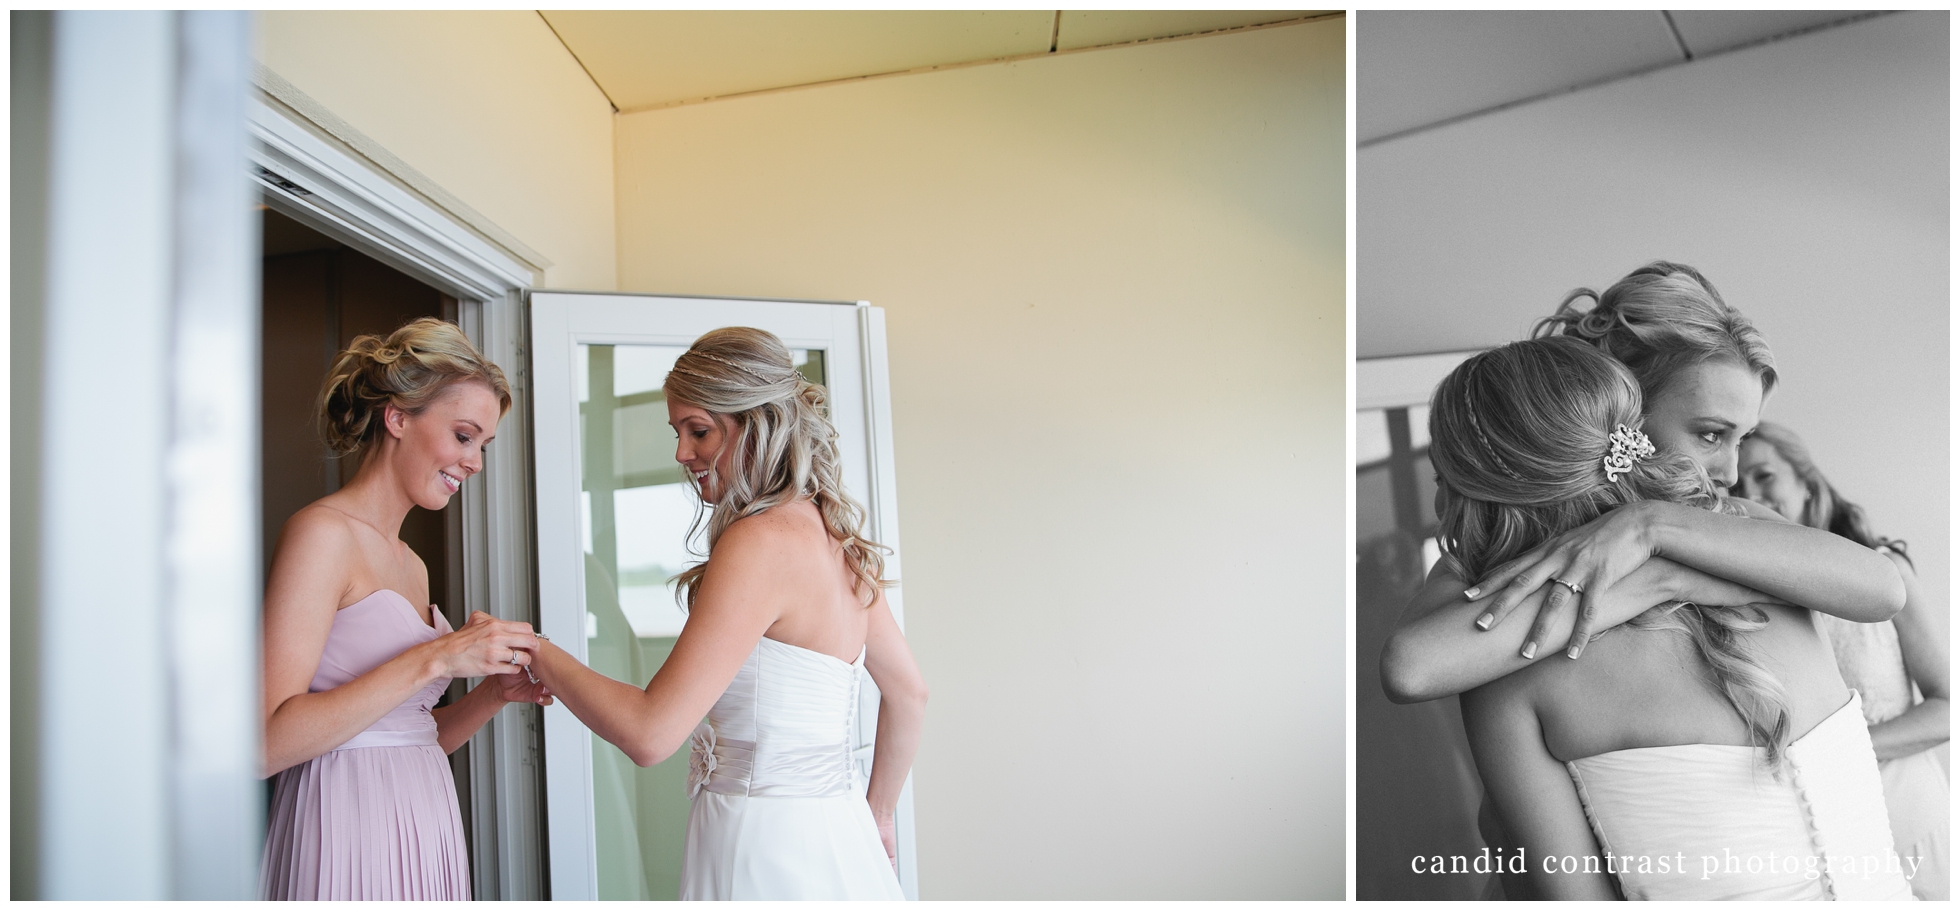 getting ready for Bellevue Iowa wedding at The Shore Event Centre, candid wedding moment with bride and sister, iowa wedding photographer candid contrast photography